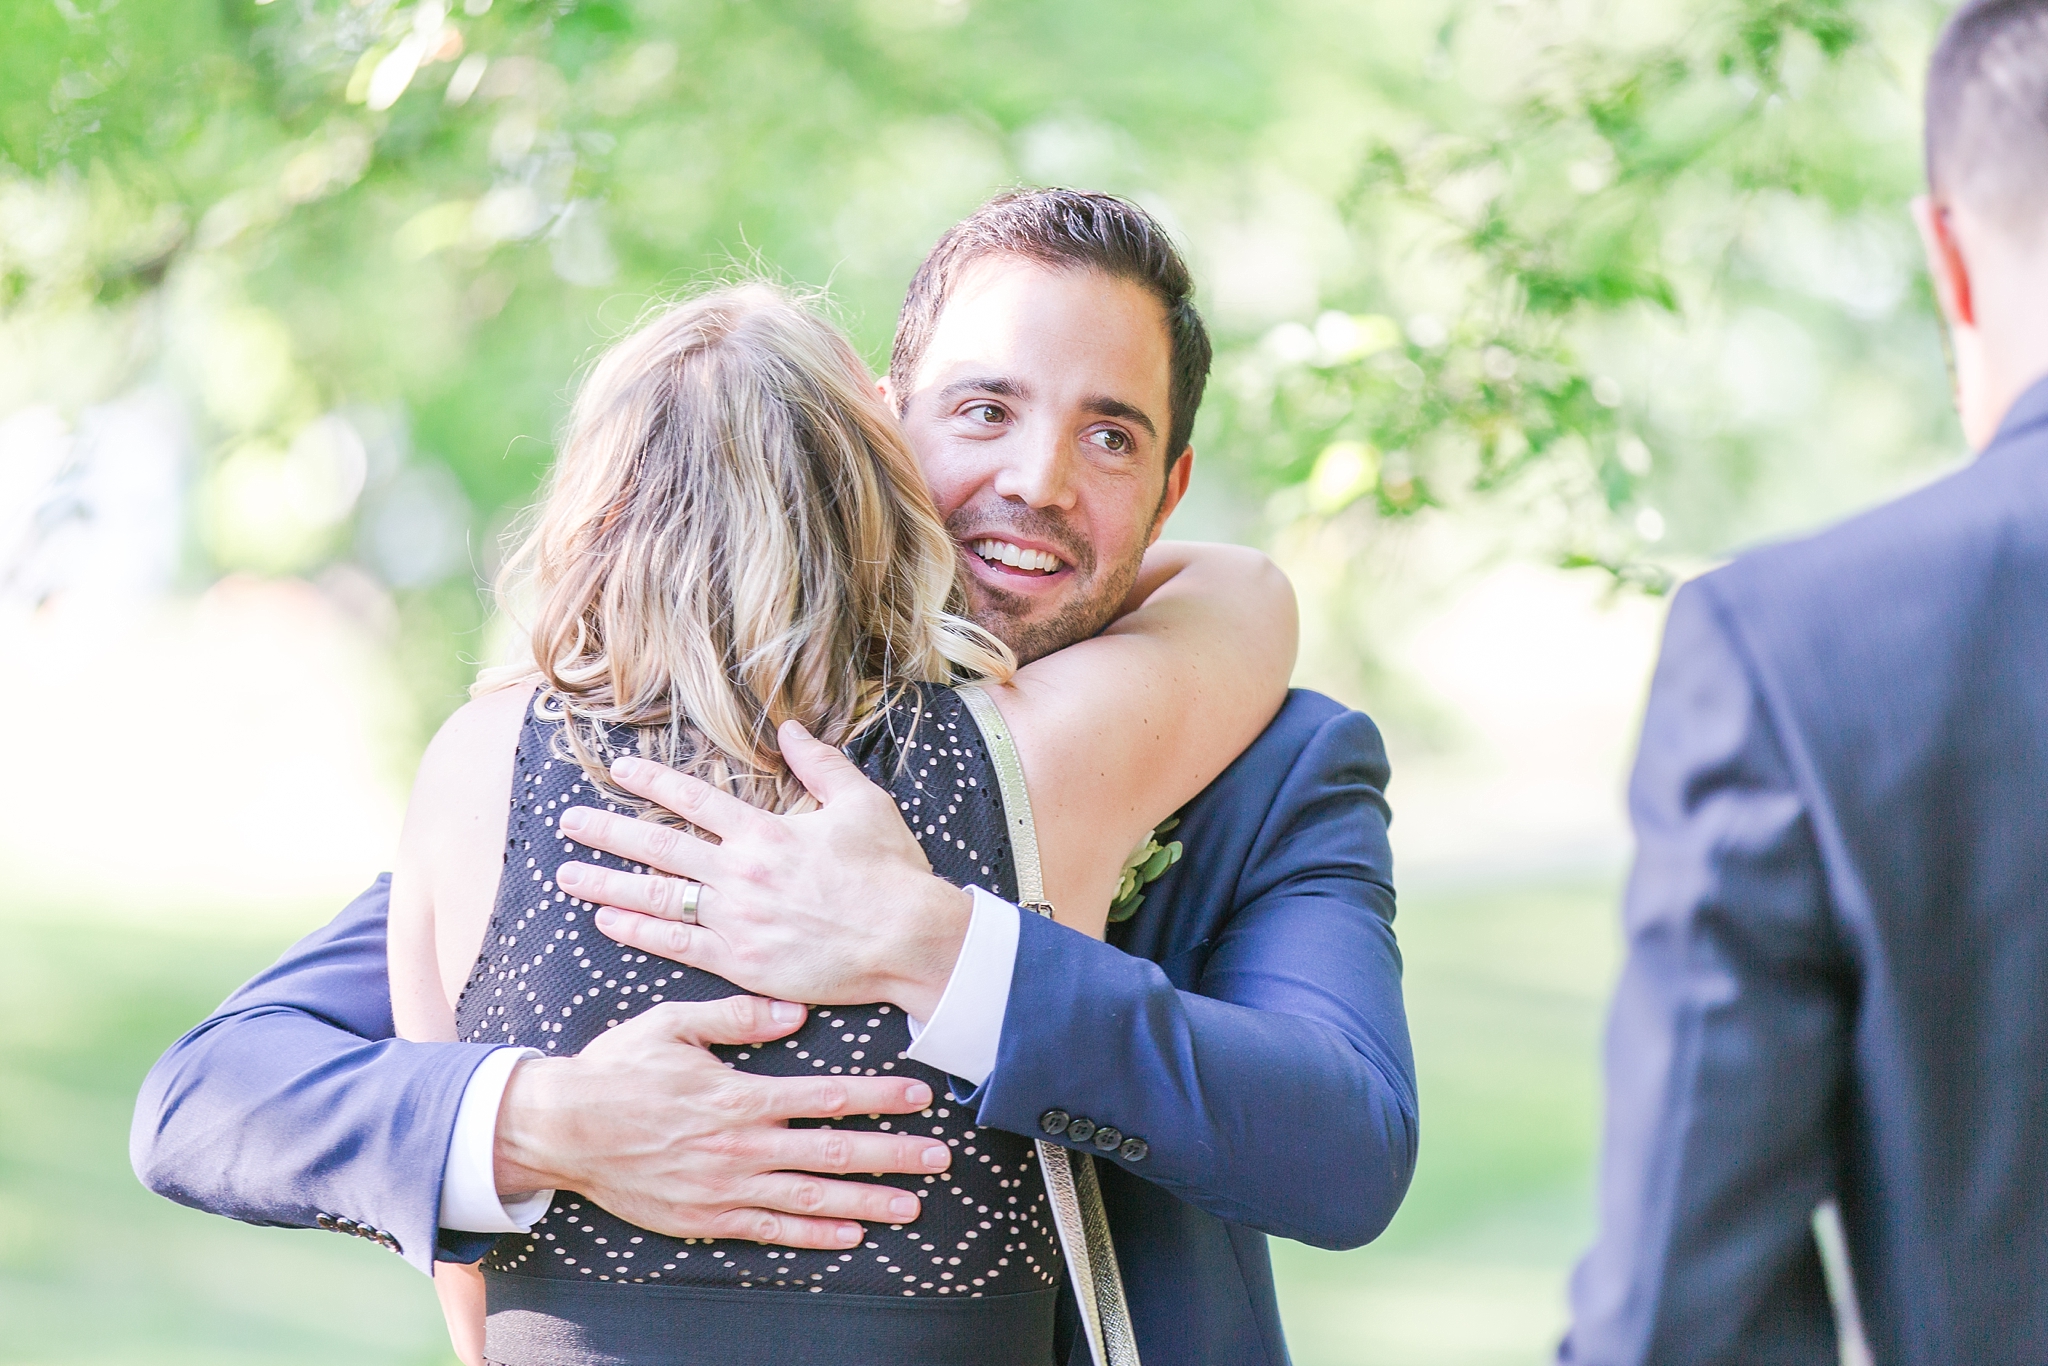 fun-candid-laid-back-wedding-photos-at-wellers-carriage-house-in-saline-michigan-and-at-the-eagle-crest-golf-resort-by-courtney-carolyn-photography_0077.jpg